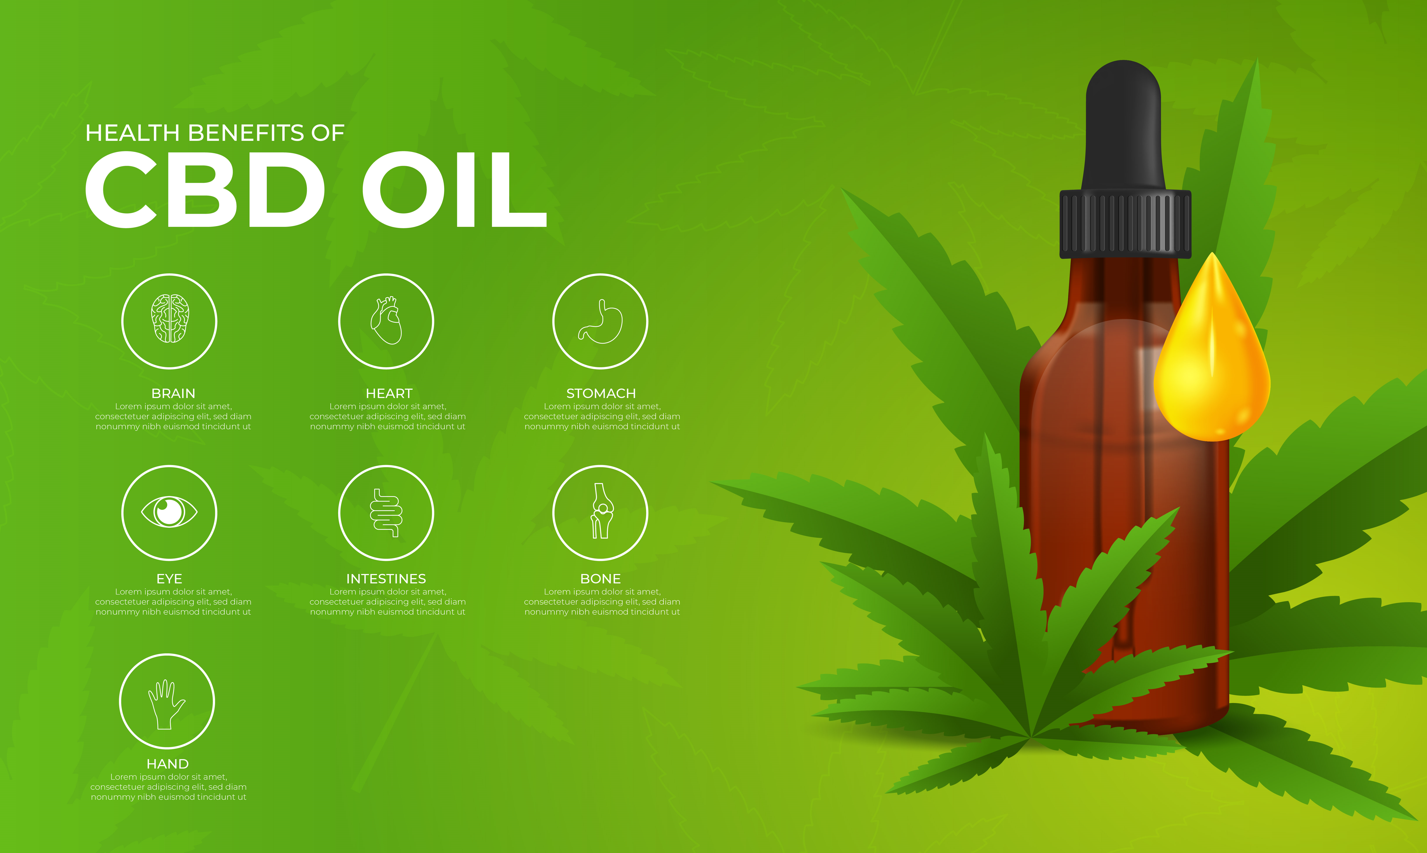 Do Medical Professionals Endorse the Use of CBD Oil?